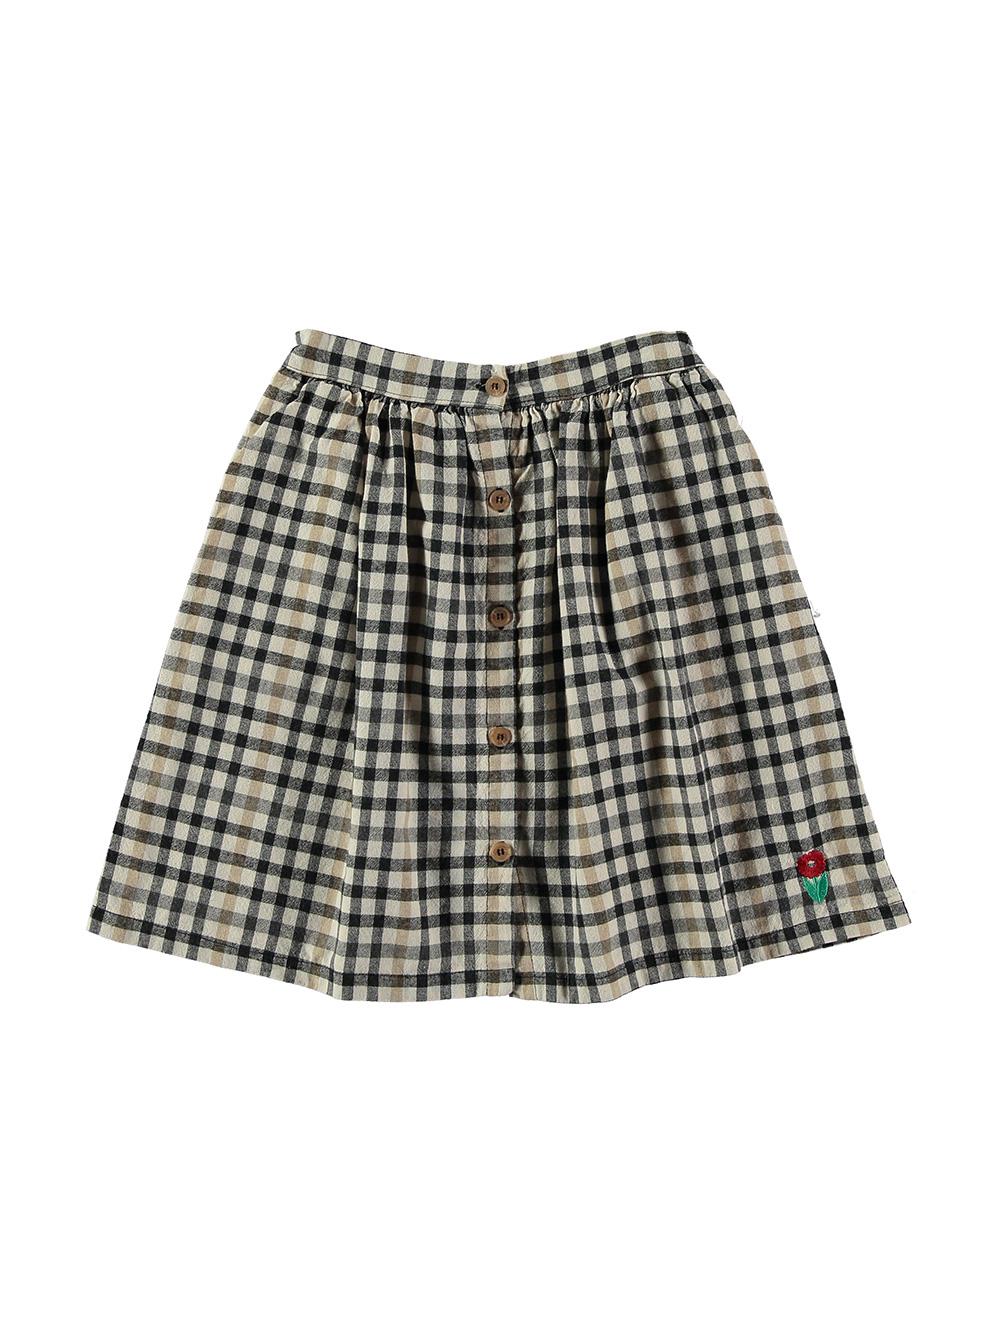 MULTICOLOR CHECKED SKIRT WITH FLOWER EMBROIDERY